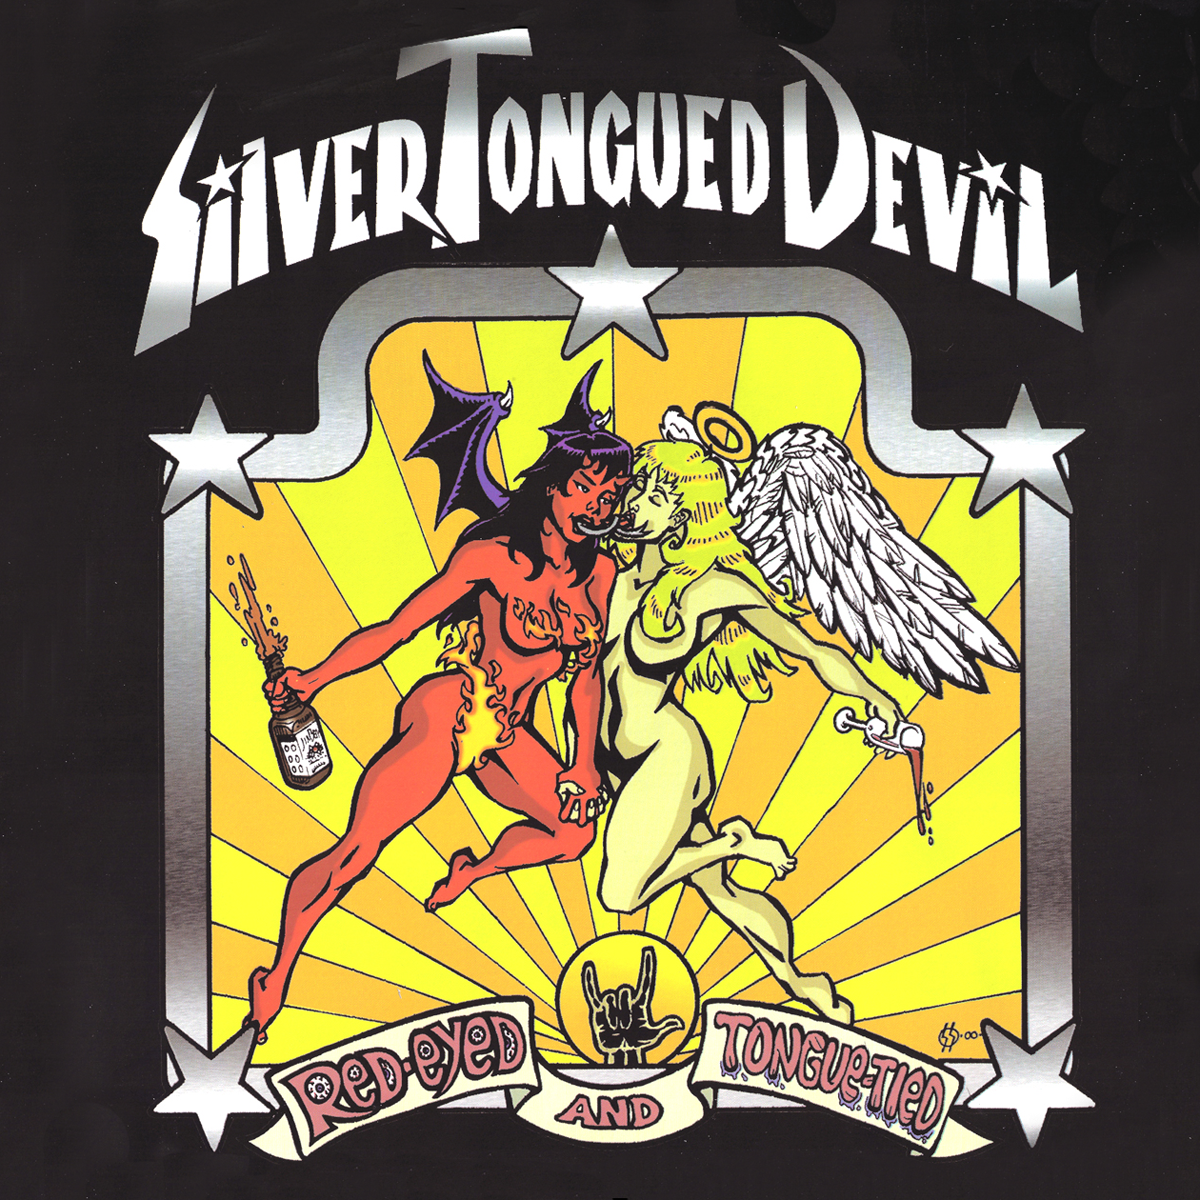 Silver Tongued Devil- Red Eyed And Tongue Tied CD ~NASHVILLE PUSSY / EX VOLCANO DOGS!